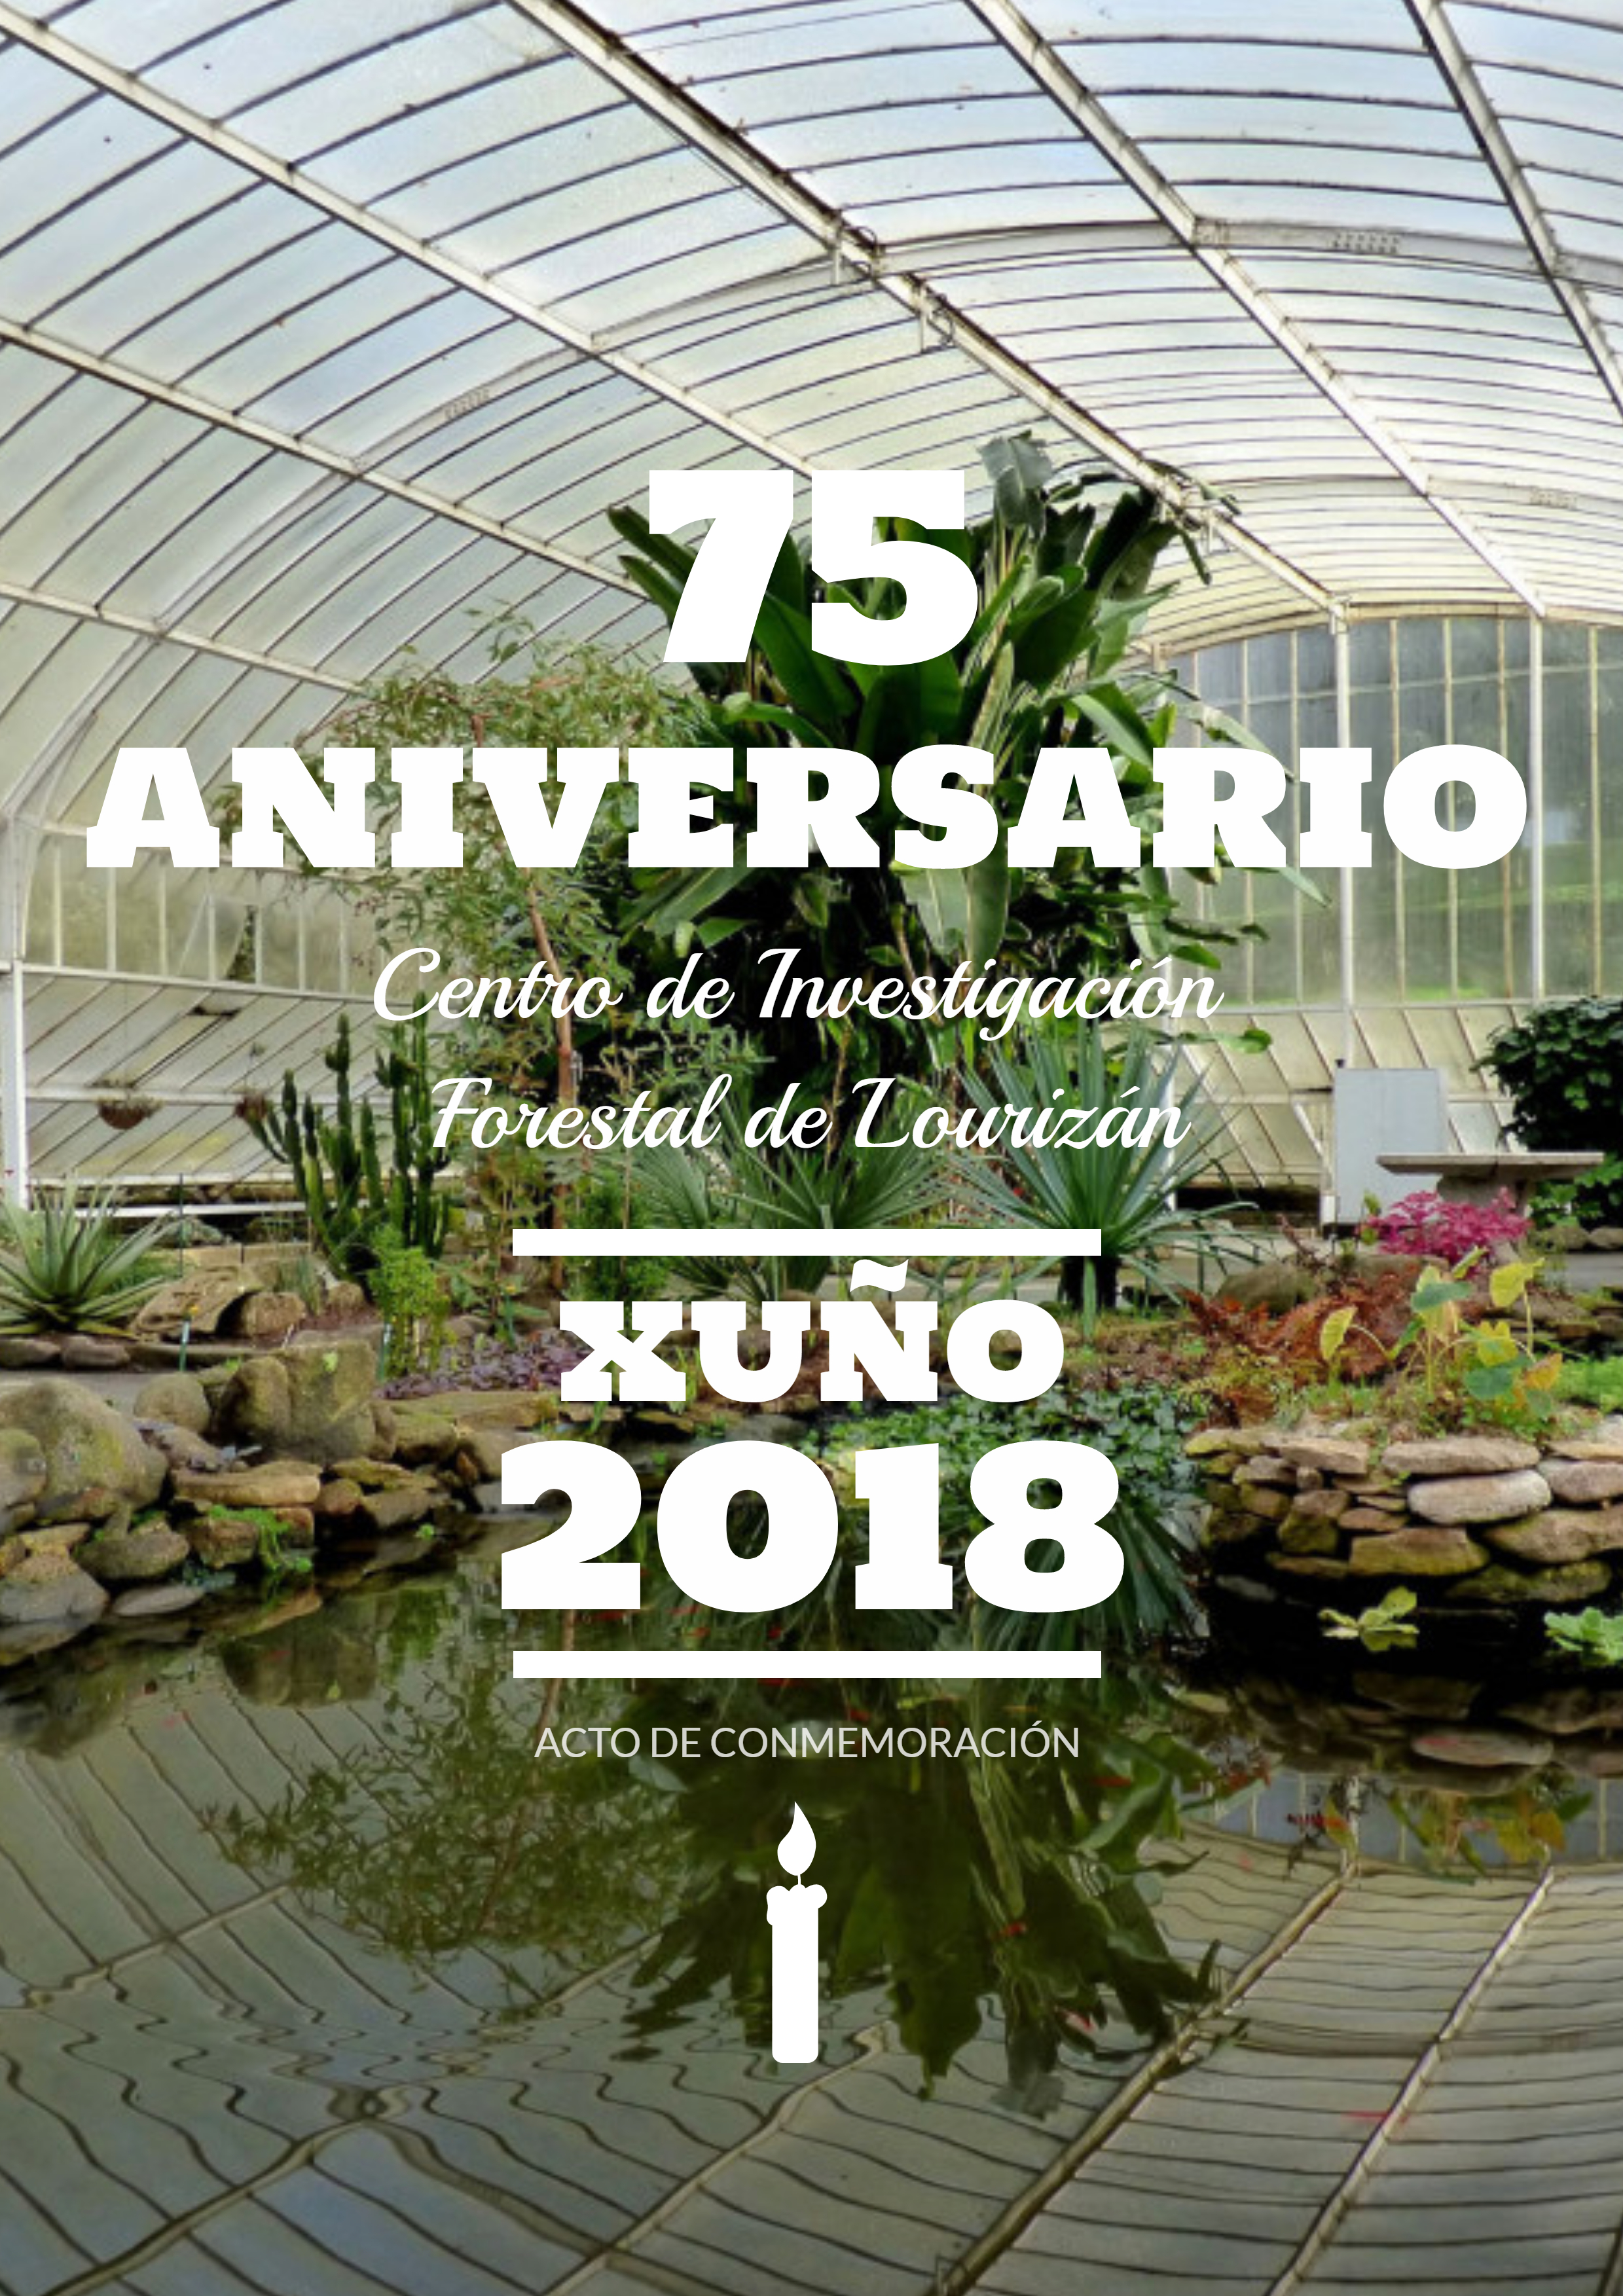 LOURIZÁN FORESTRY RESEARCH CENTRE IS GOING TO CELEBRATE THE 75TH ANNIVERSARY OF ITS FOUNDING IN JUNE